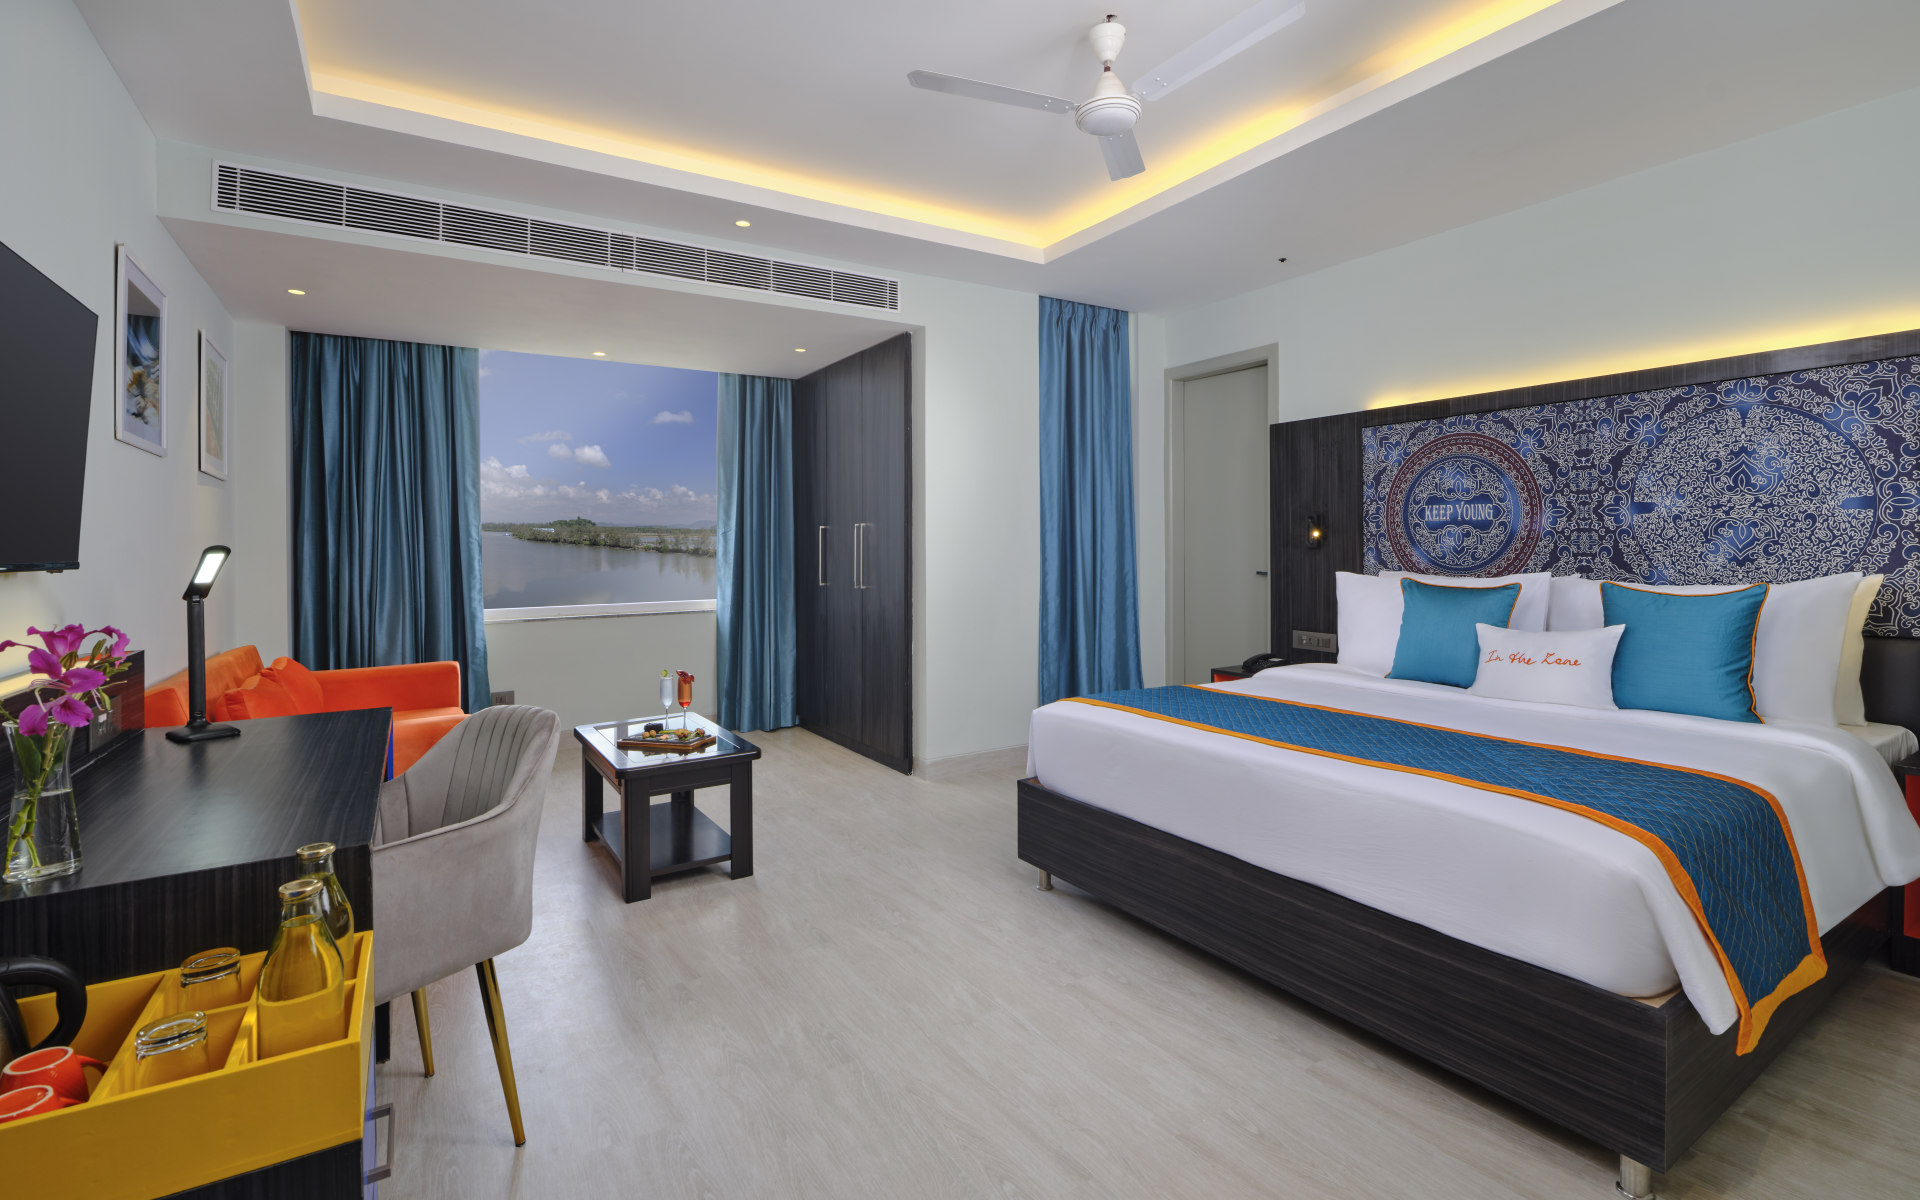 zone%20connet%20portblair%20room.png